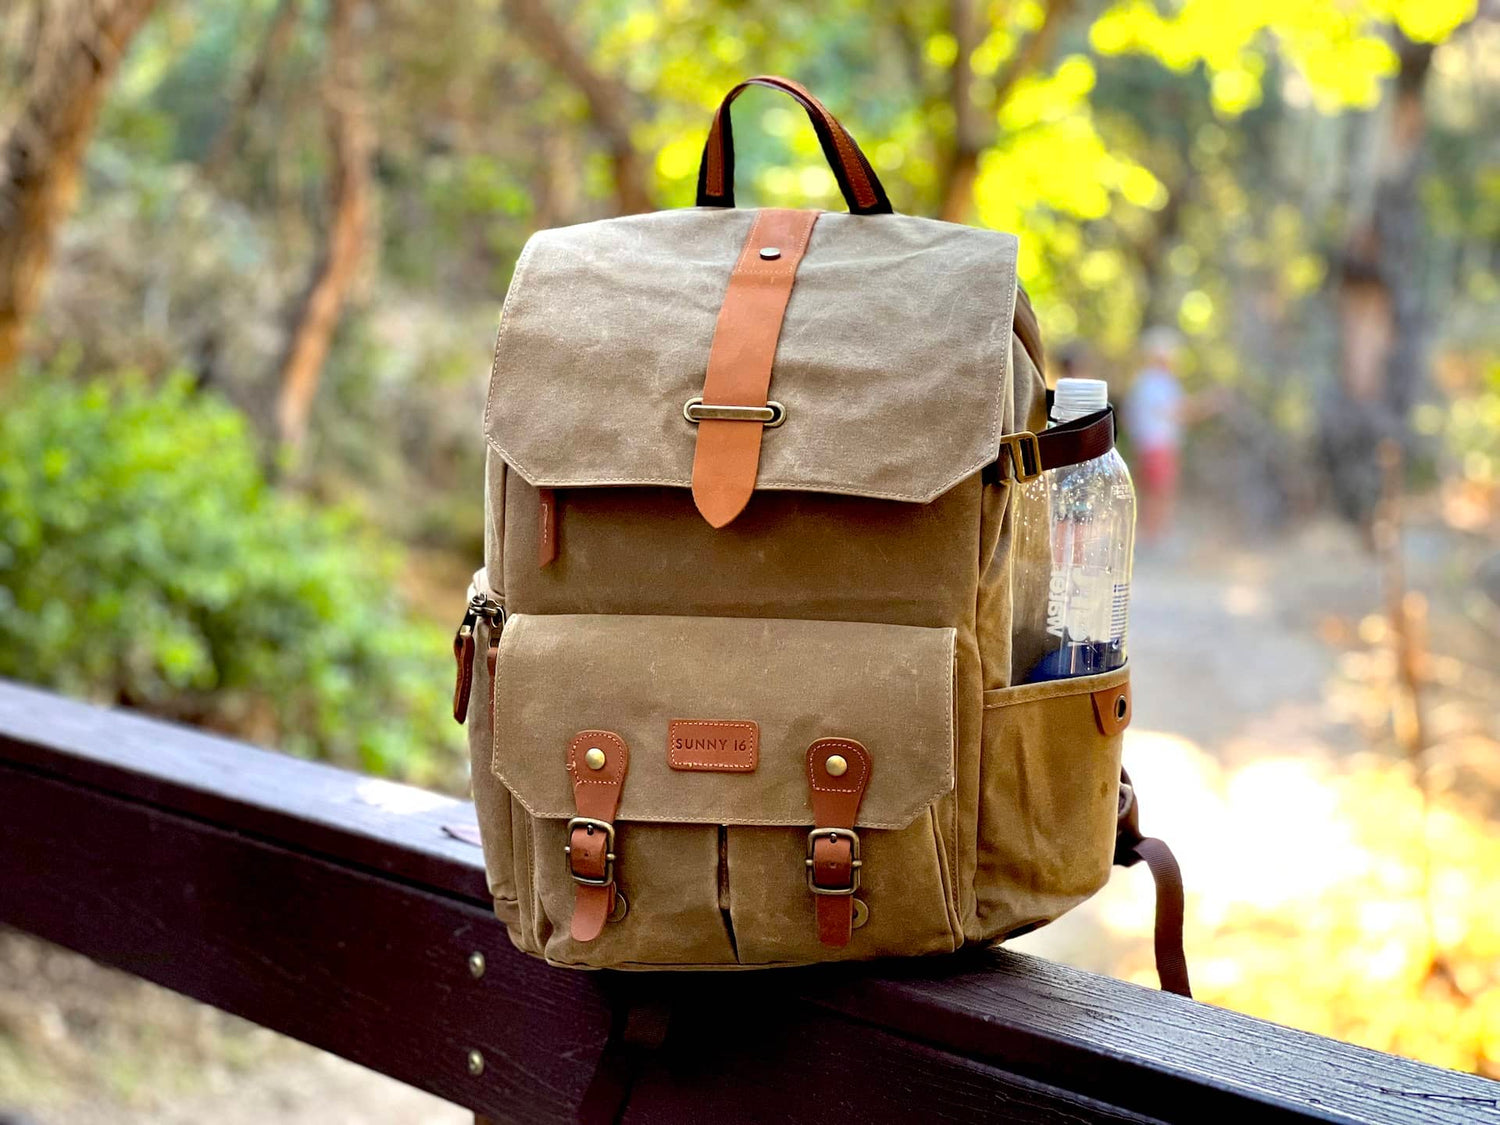 Camera Backpack for Hiking Outdors - Sunny 16 Voyager Backpack